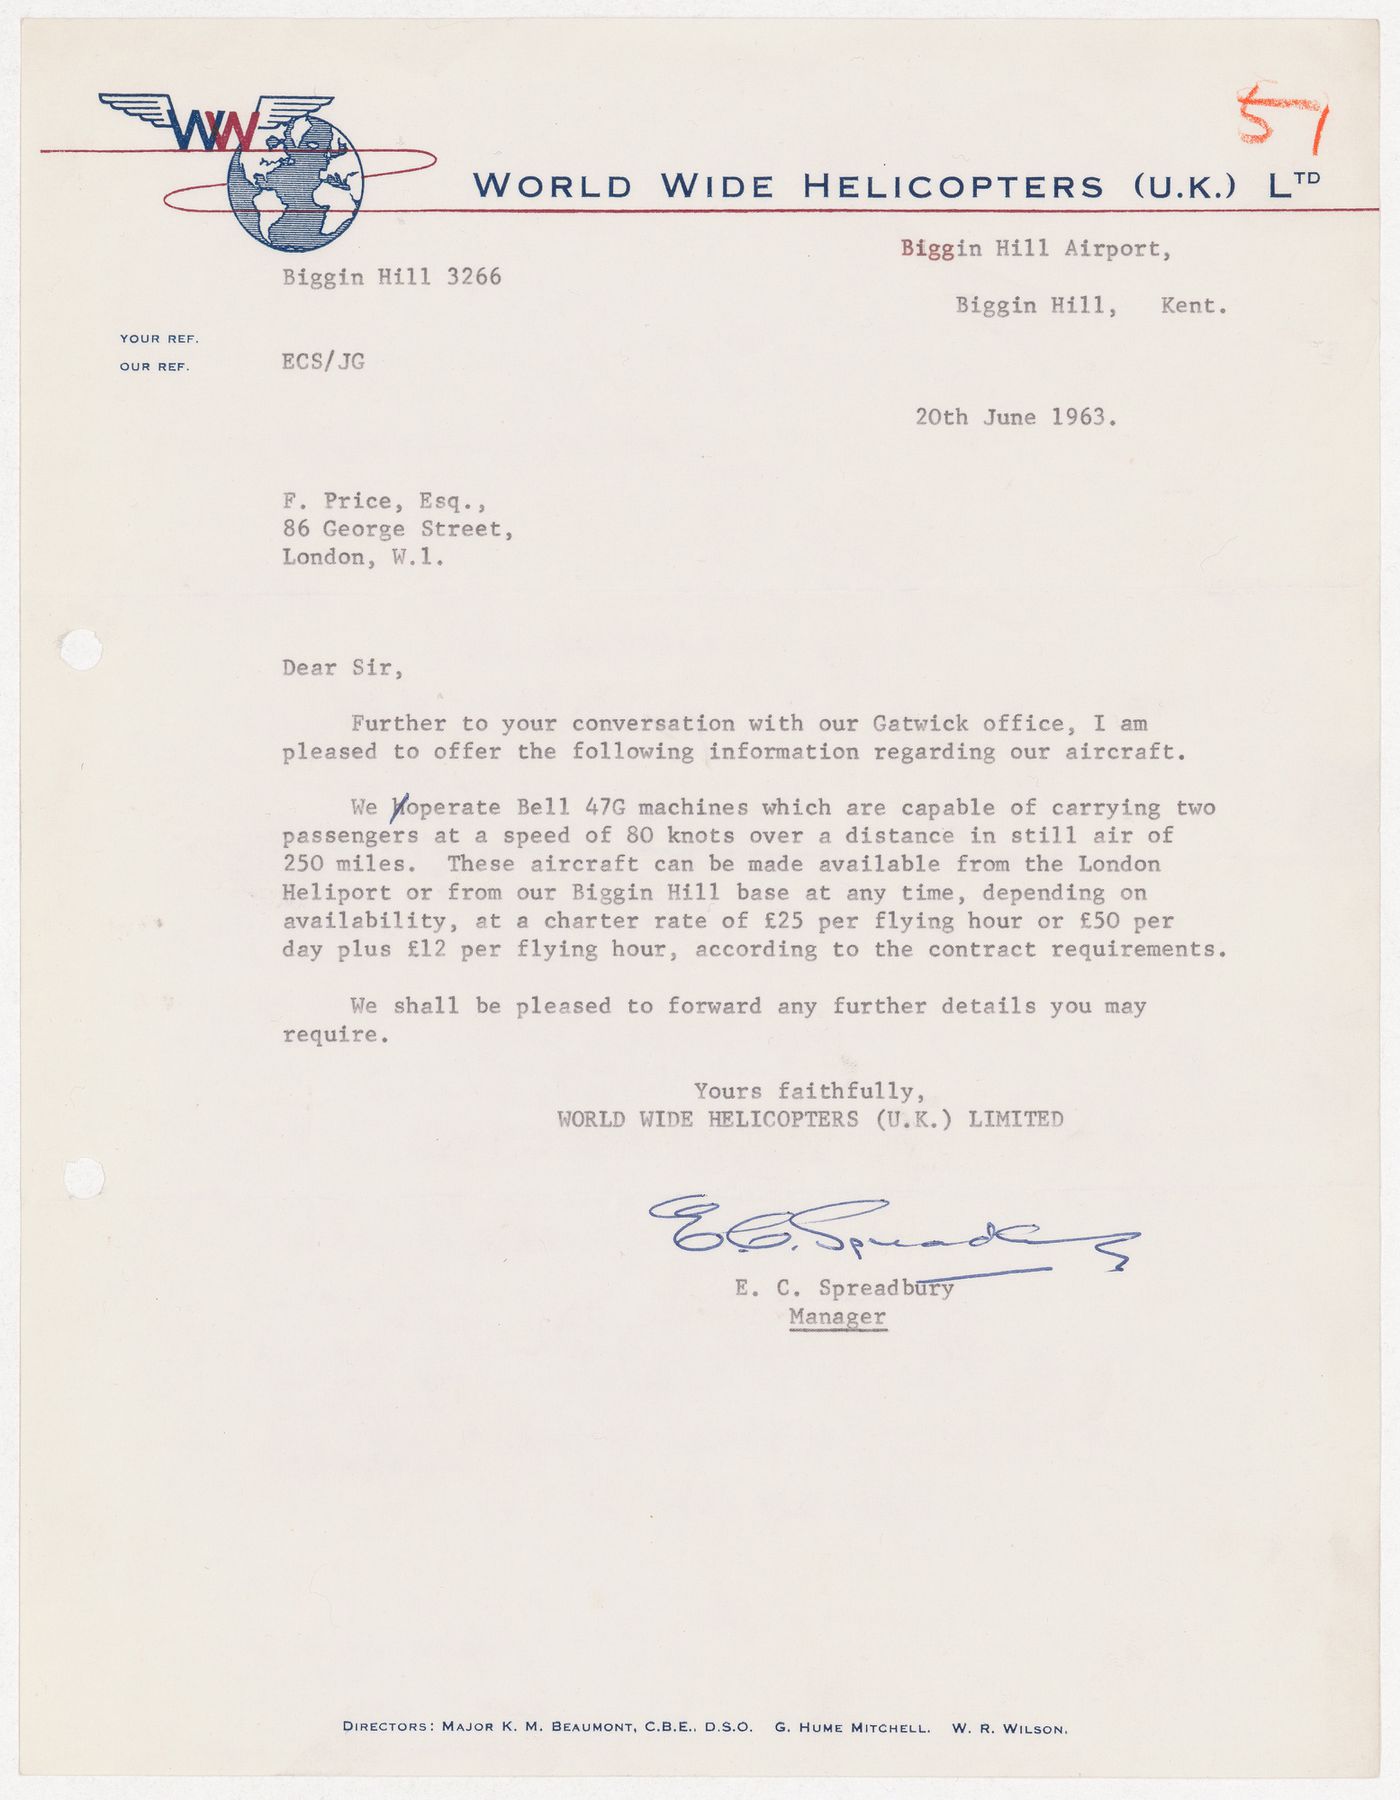 Letter from E.C. Spreadbury of World Wide Helicopters (U.K.) Limited to Cedric Price